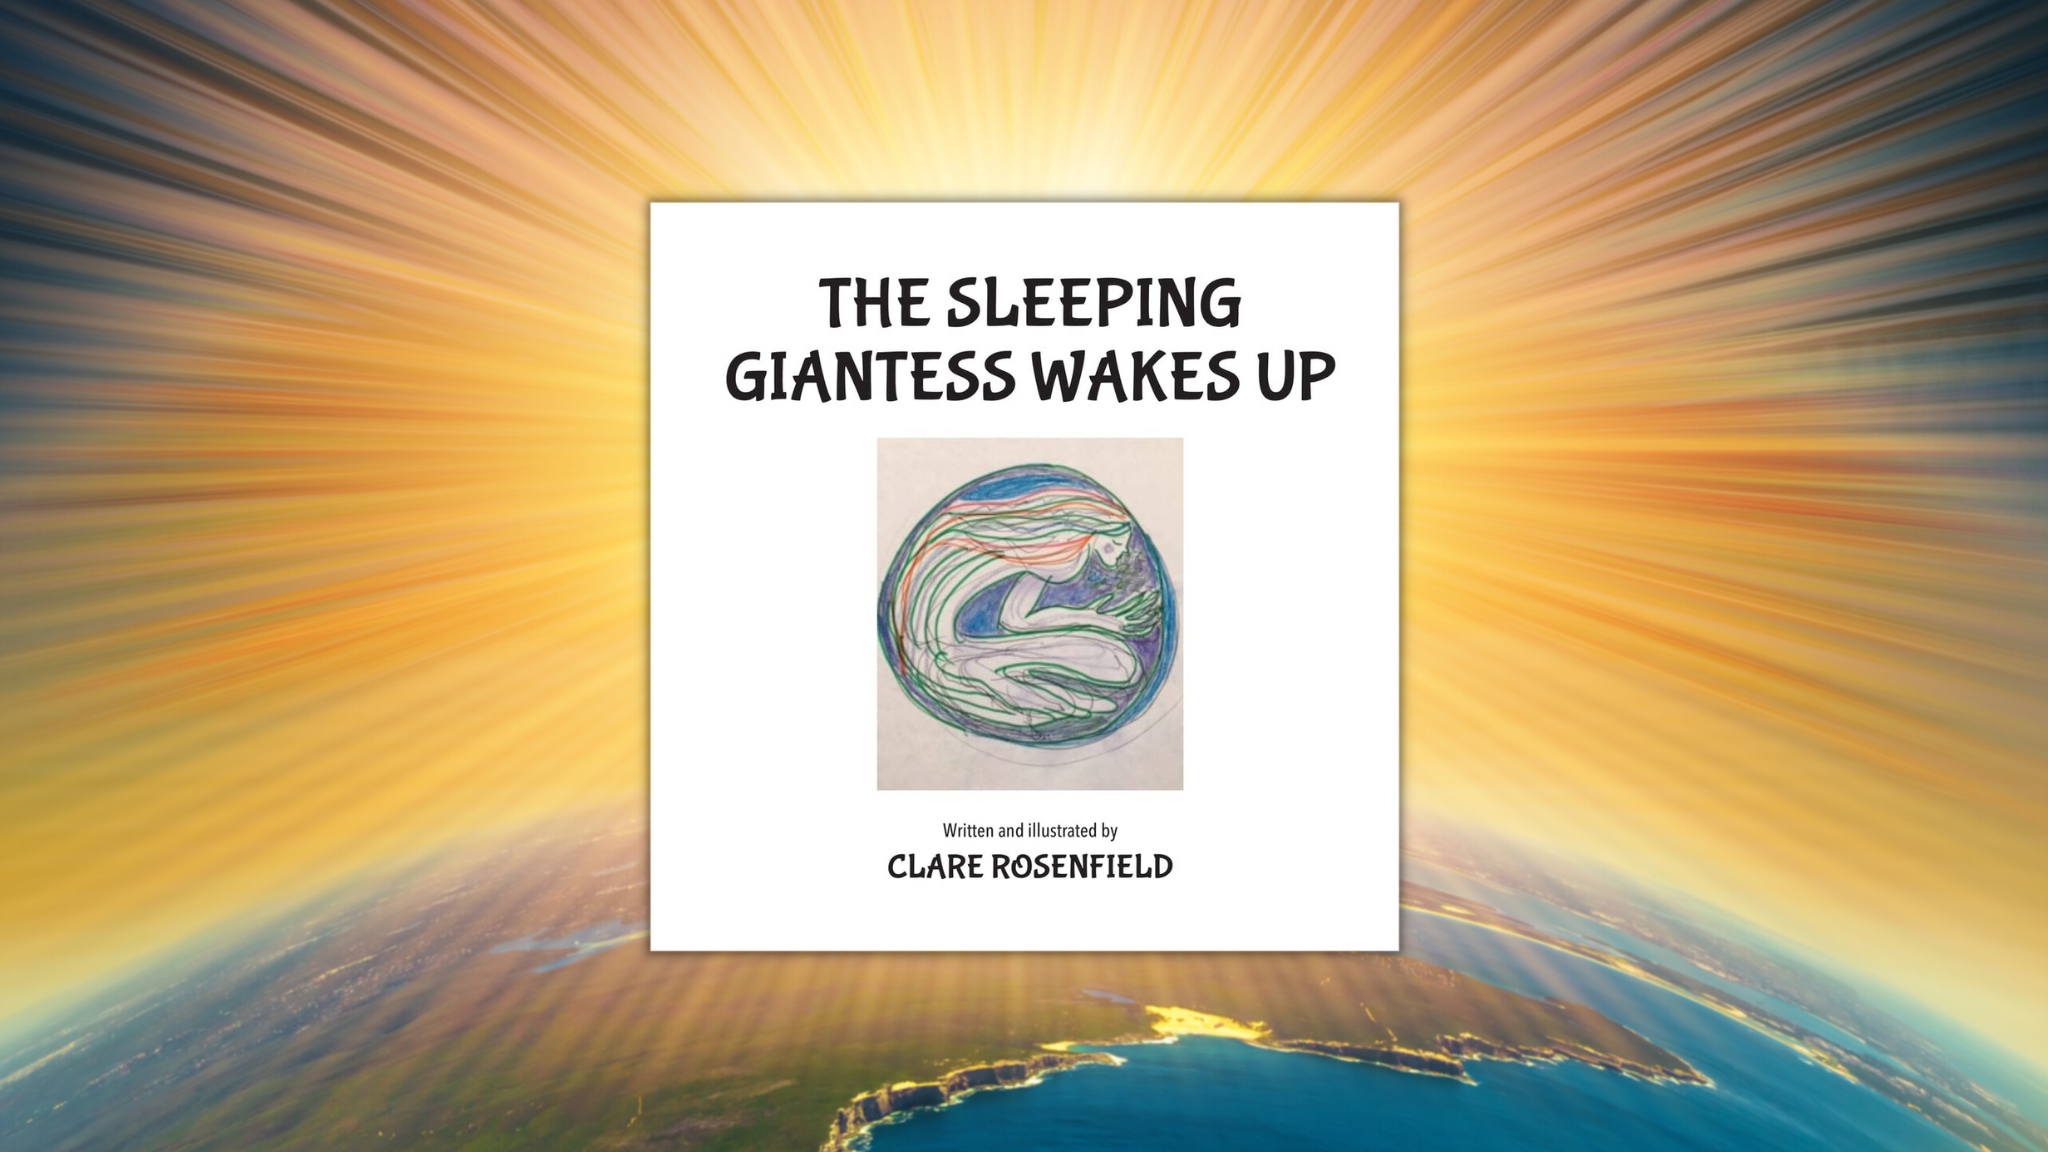 The Sleeping Giantess Wakes Up by Clare Rosenfield